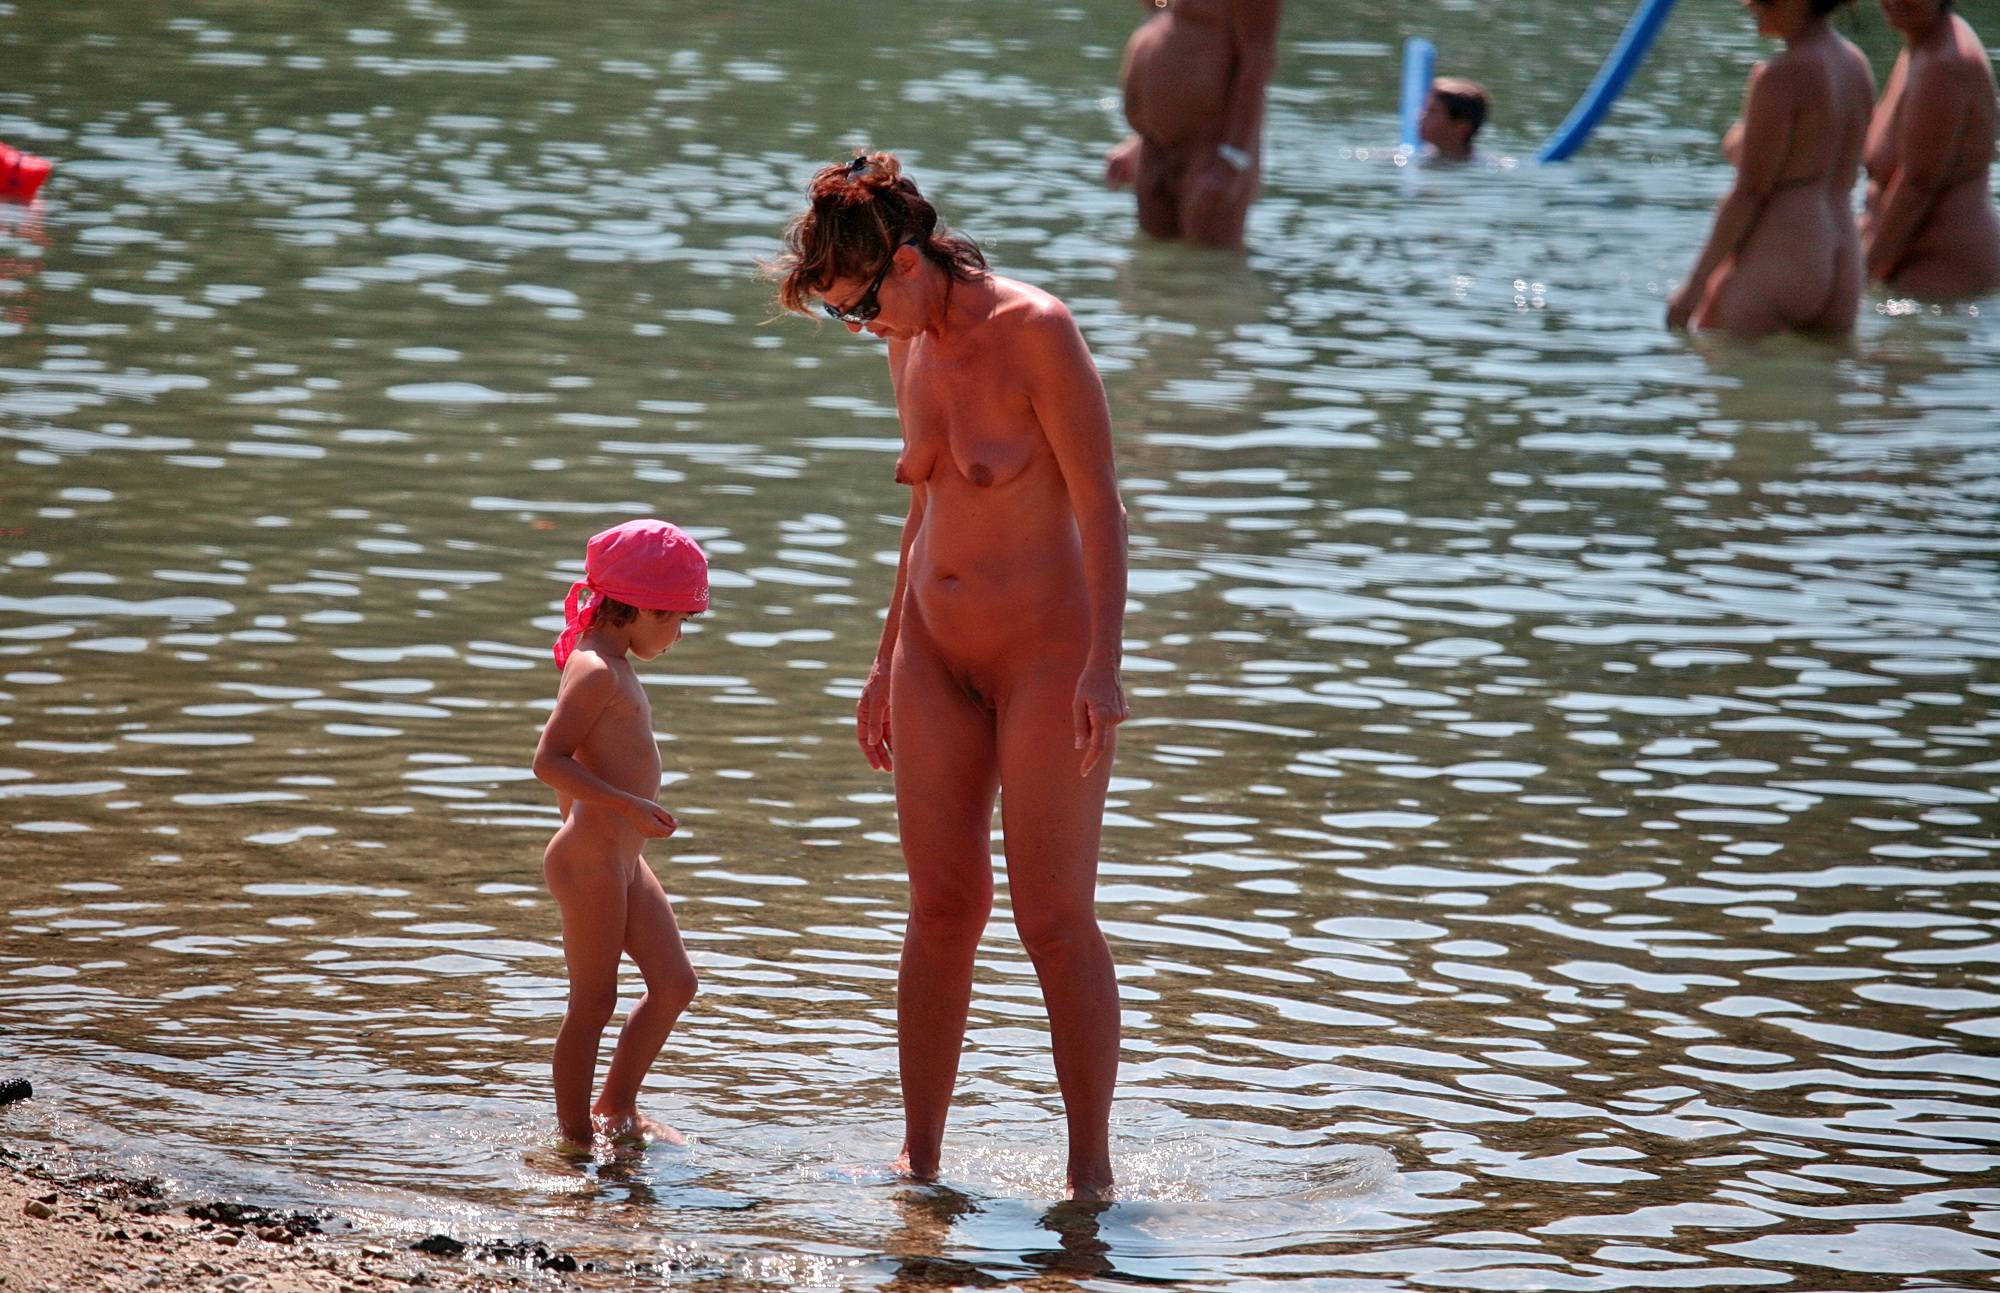 Purenudism Images-By the Water Shore Play - 1